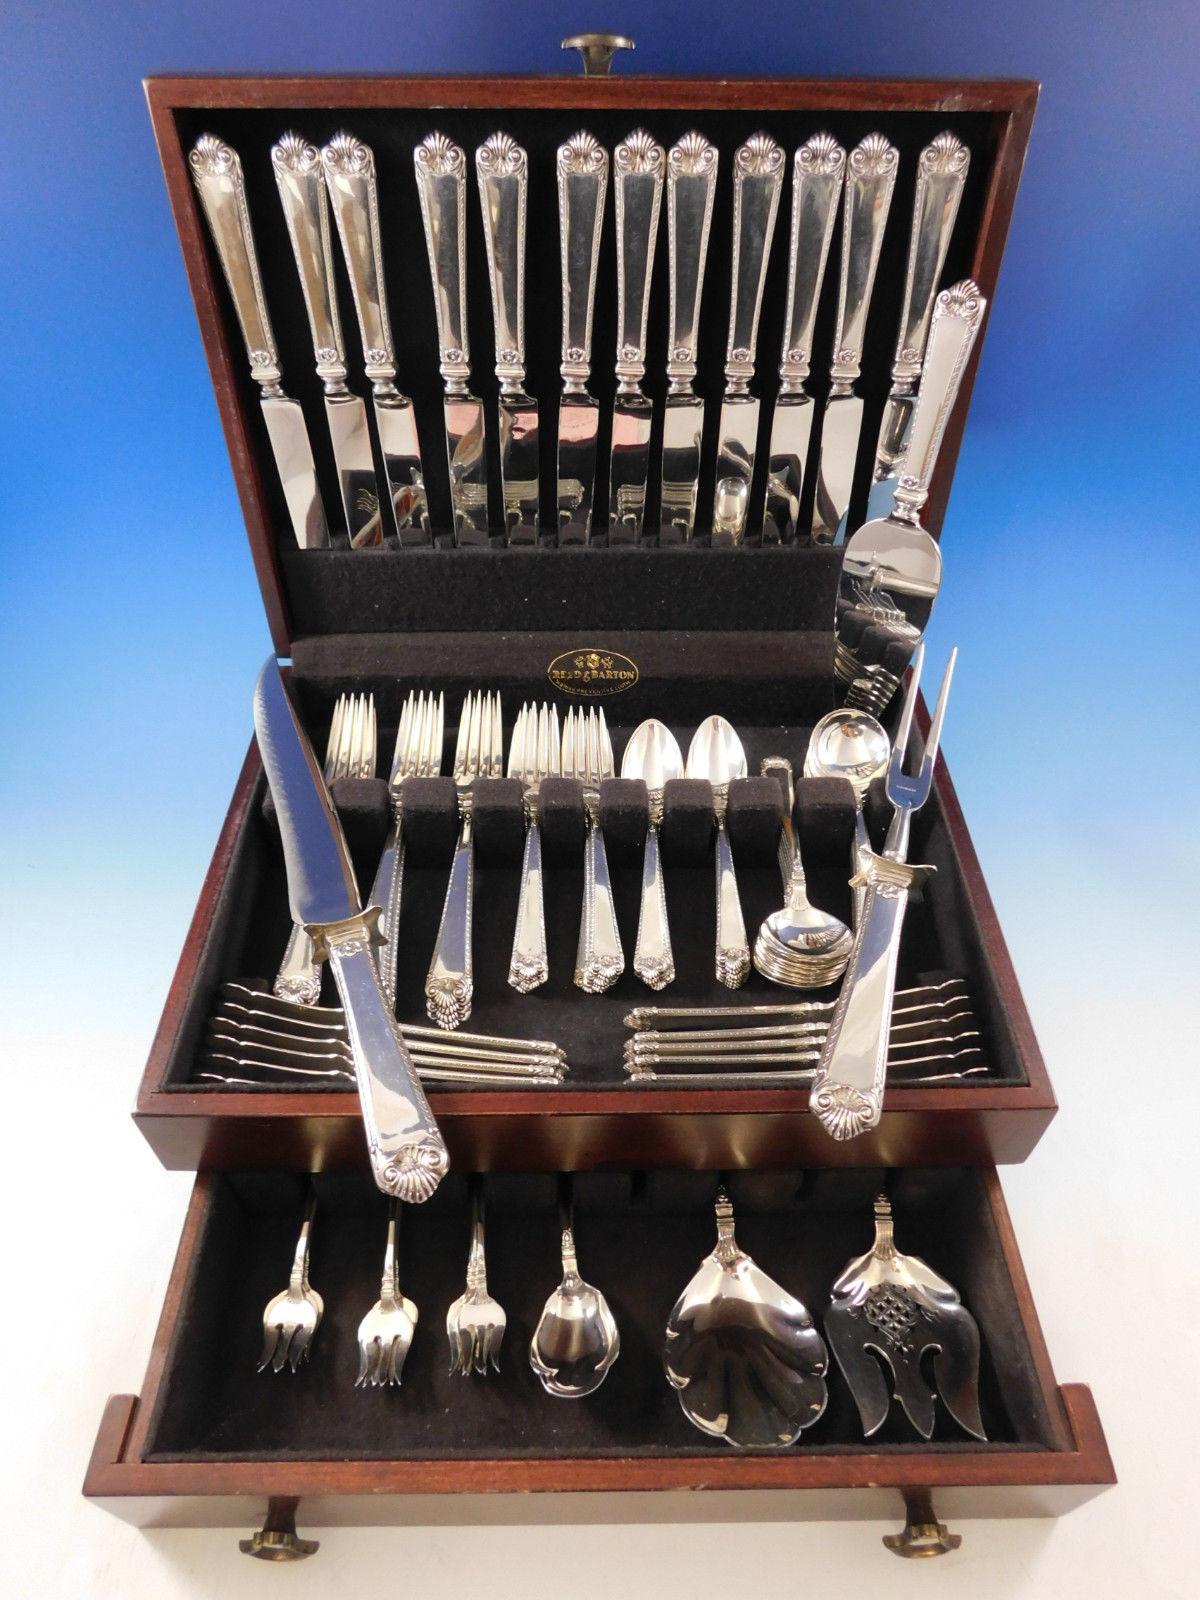 Large and heavy Dinner Size George II Rex Hand Chased by Watson, circa 1936, Sterling Silver Flatware set - 90 pieces. This set includes:

12 Large Dinner Size Knives, 10 1/8